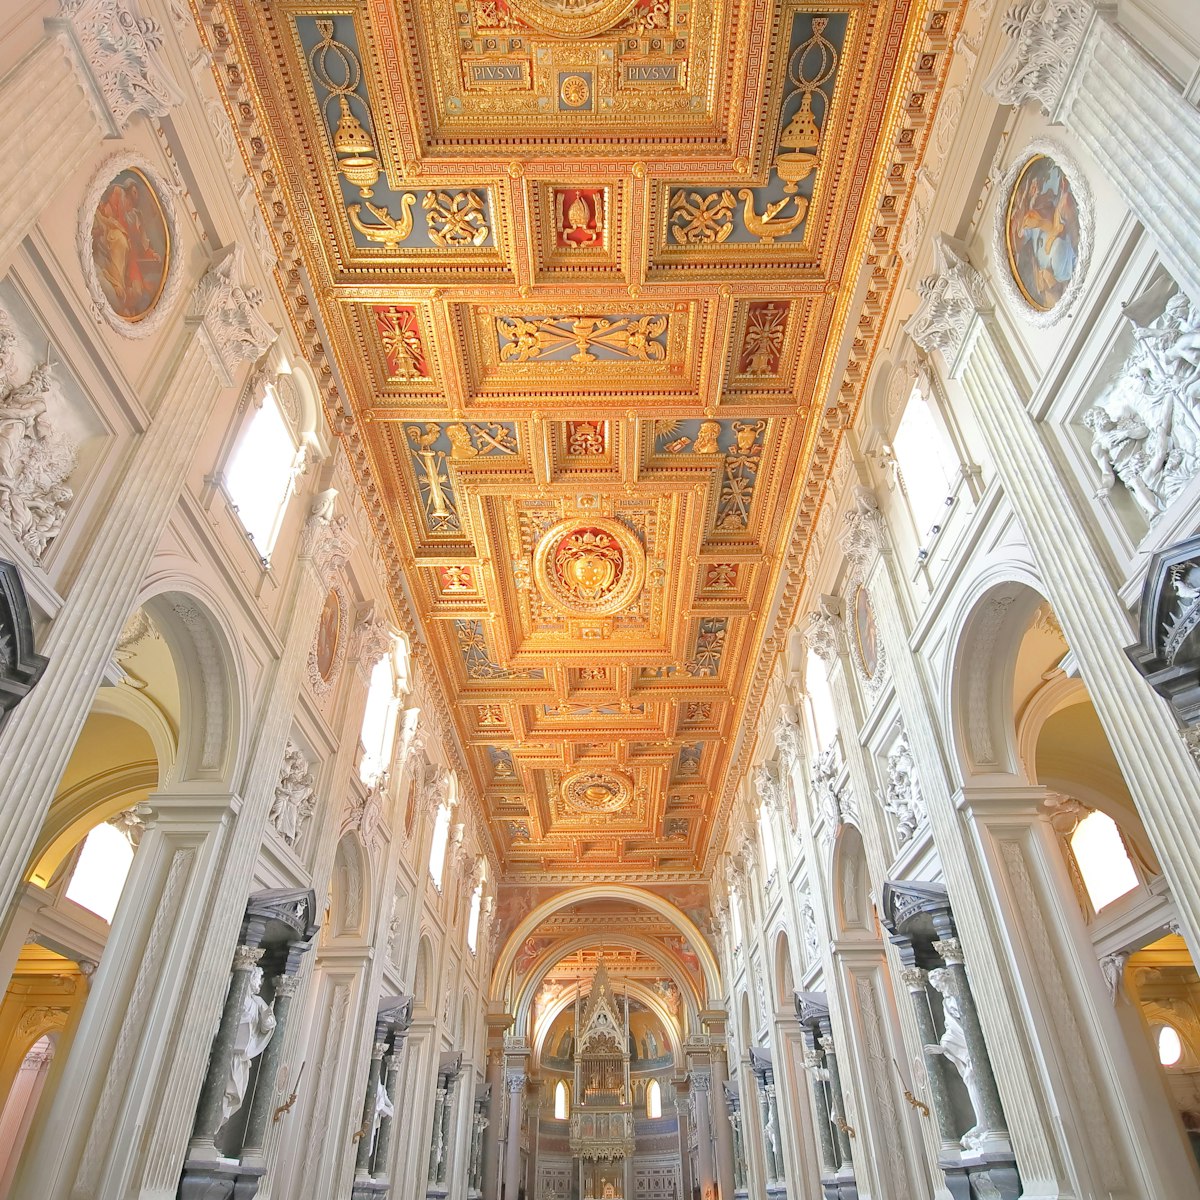 JUNE 17, 2019: Inside the Basilica of San Giovanni in Laterano Church.
1490788748
architecture, basilica, building, cathedral, ceiling, christian, christianity, church, europe, interior, italian, italy, landmark, old, religion, religious, rome, san giovanni, tourism, travel, worship